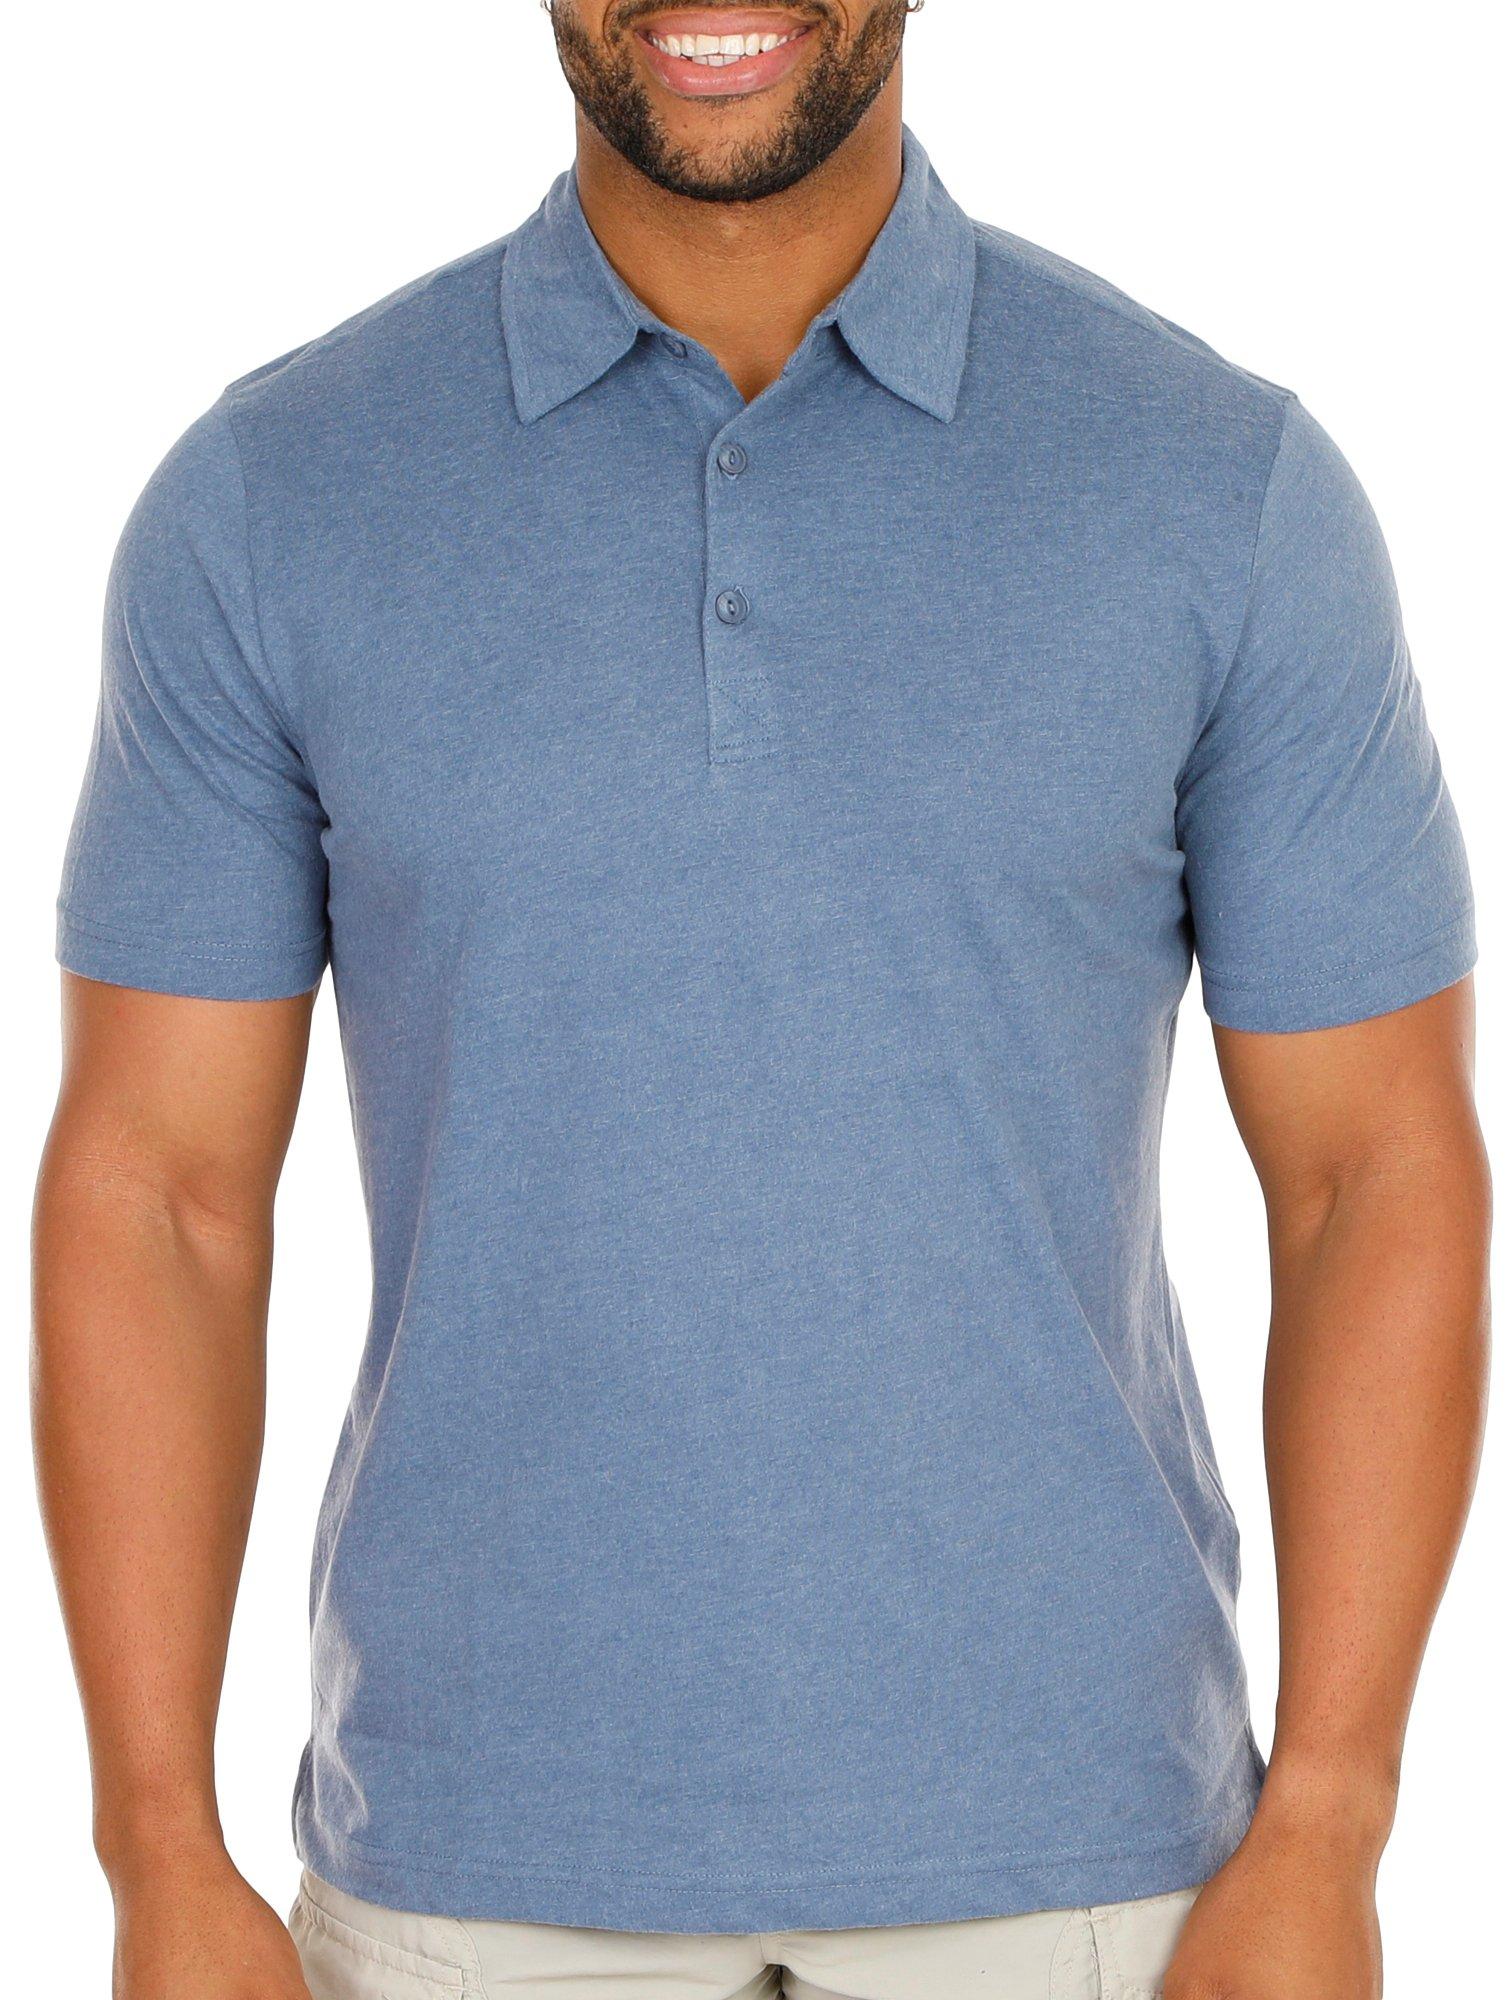 Men's Solid Polo Shirt - Blue